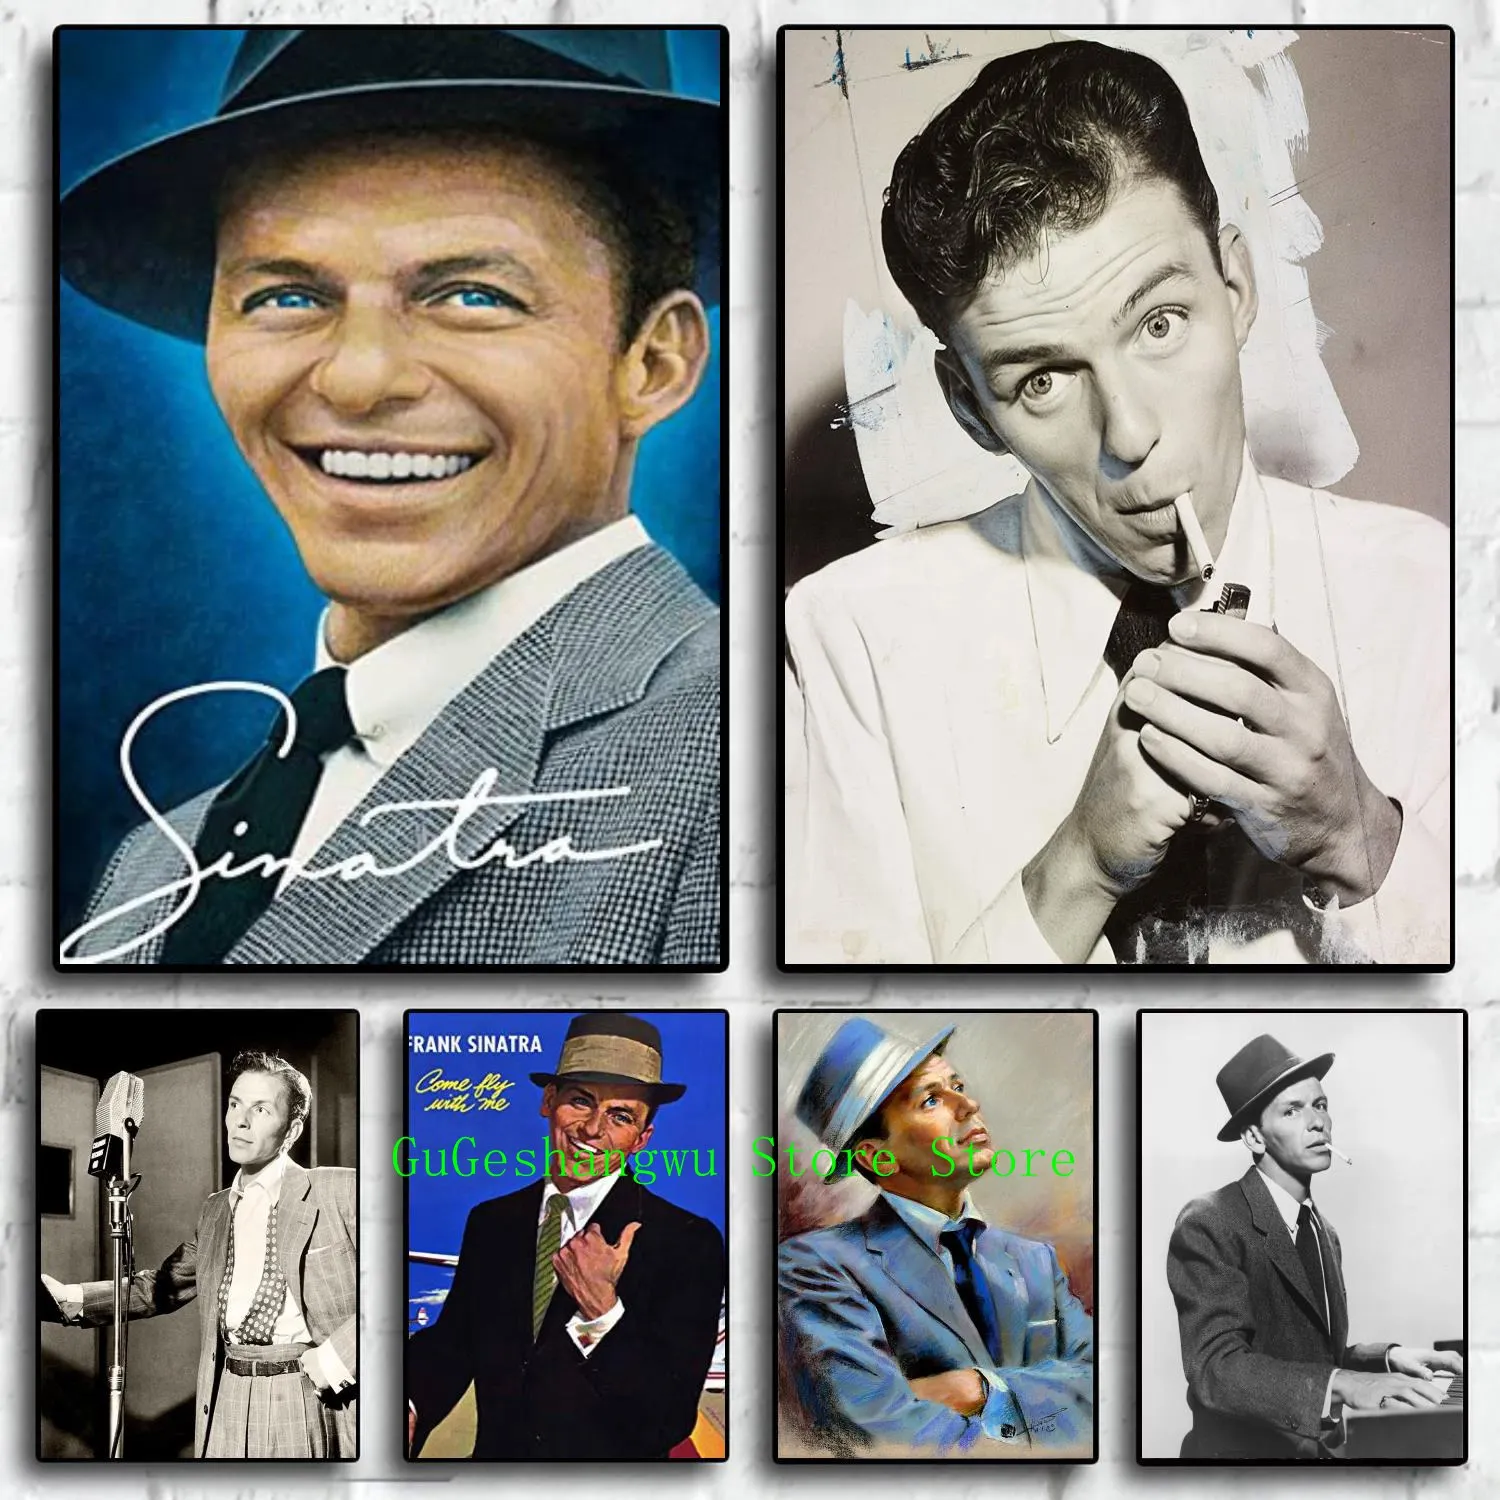 

frank sinatra singer Canvas Art Poster and Wall Art Picture Print Modern Family bedroom Decor Posters